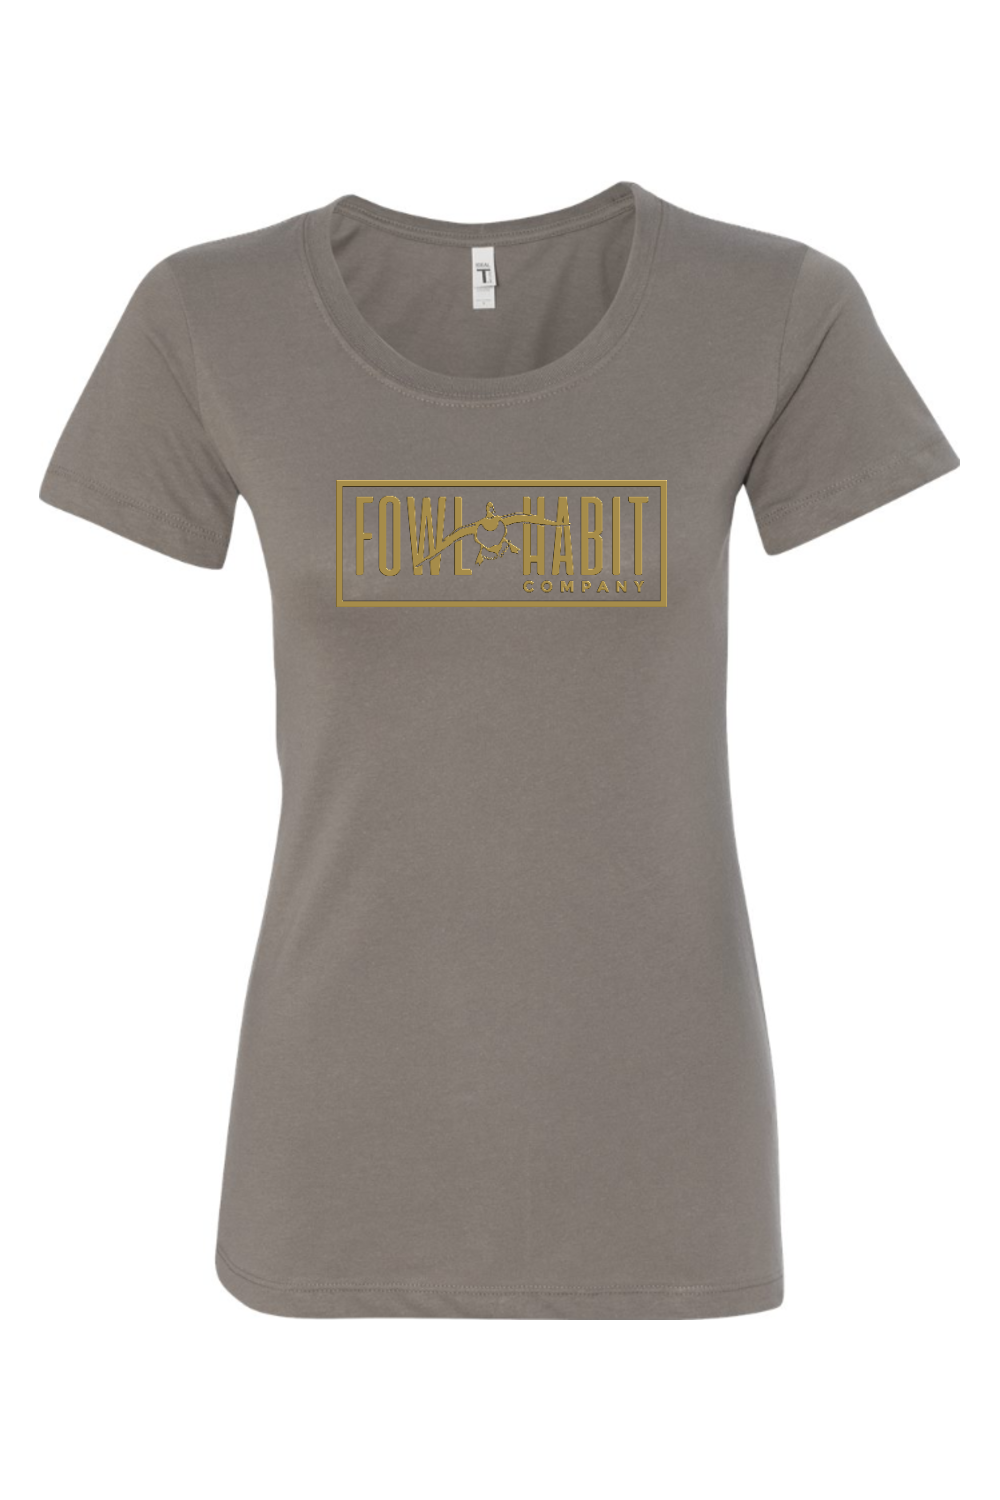 Womens Cupped Up T-Shirt - Fowl Habit Co.